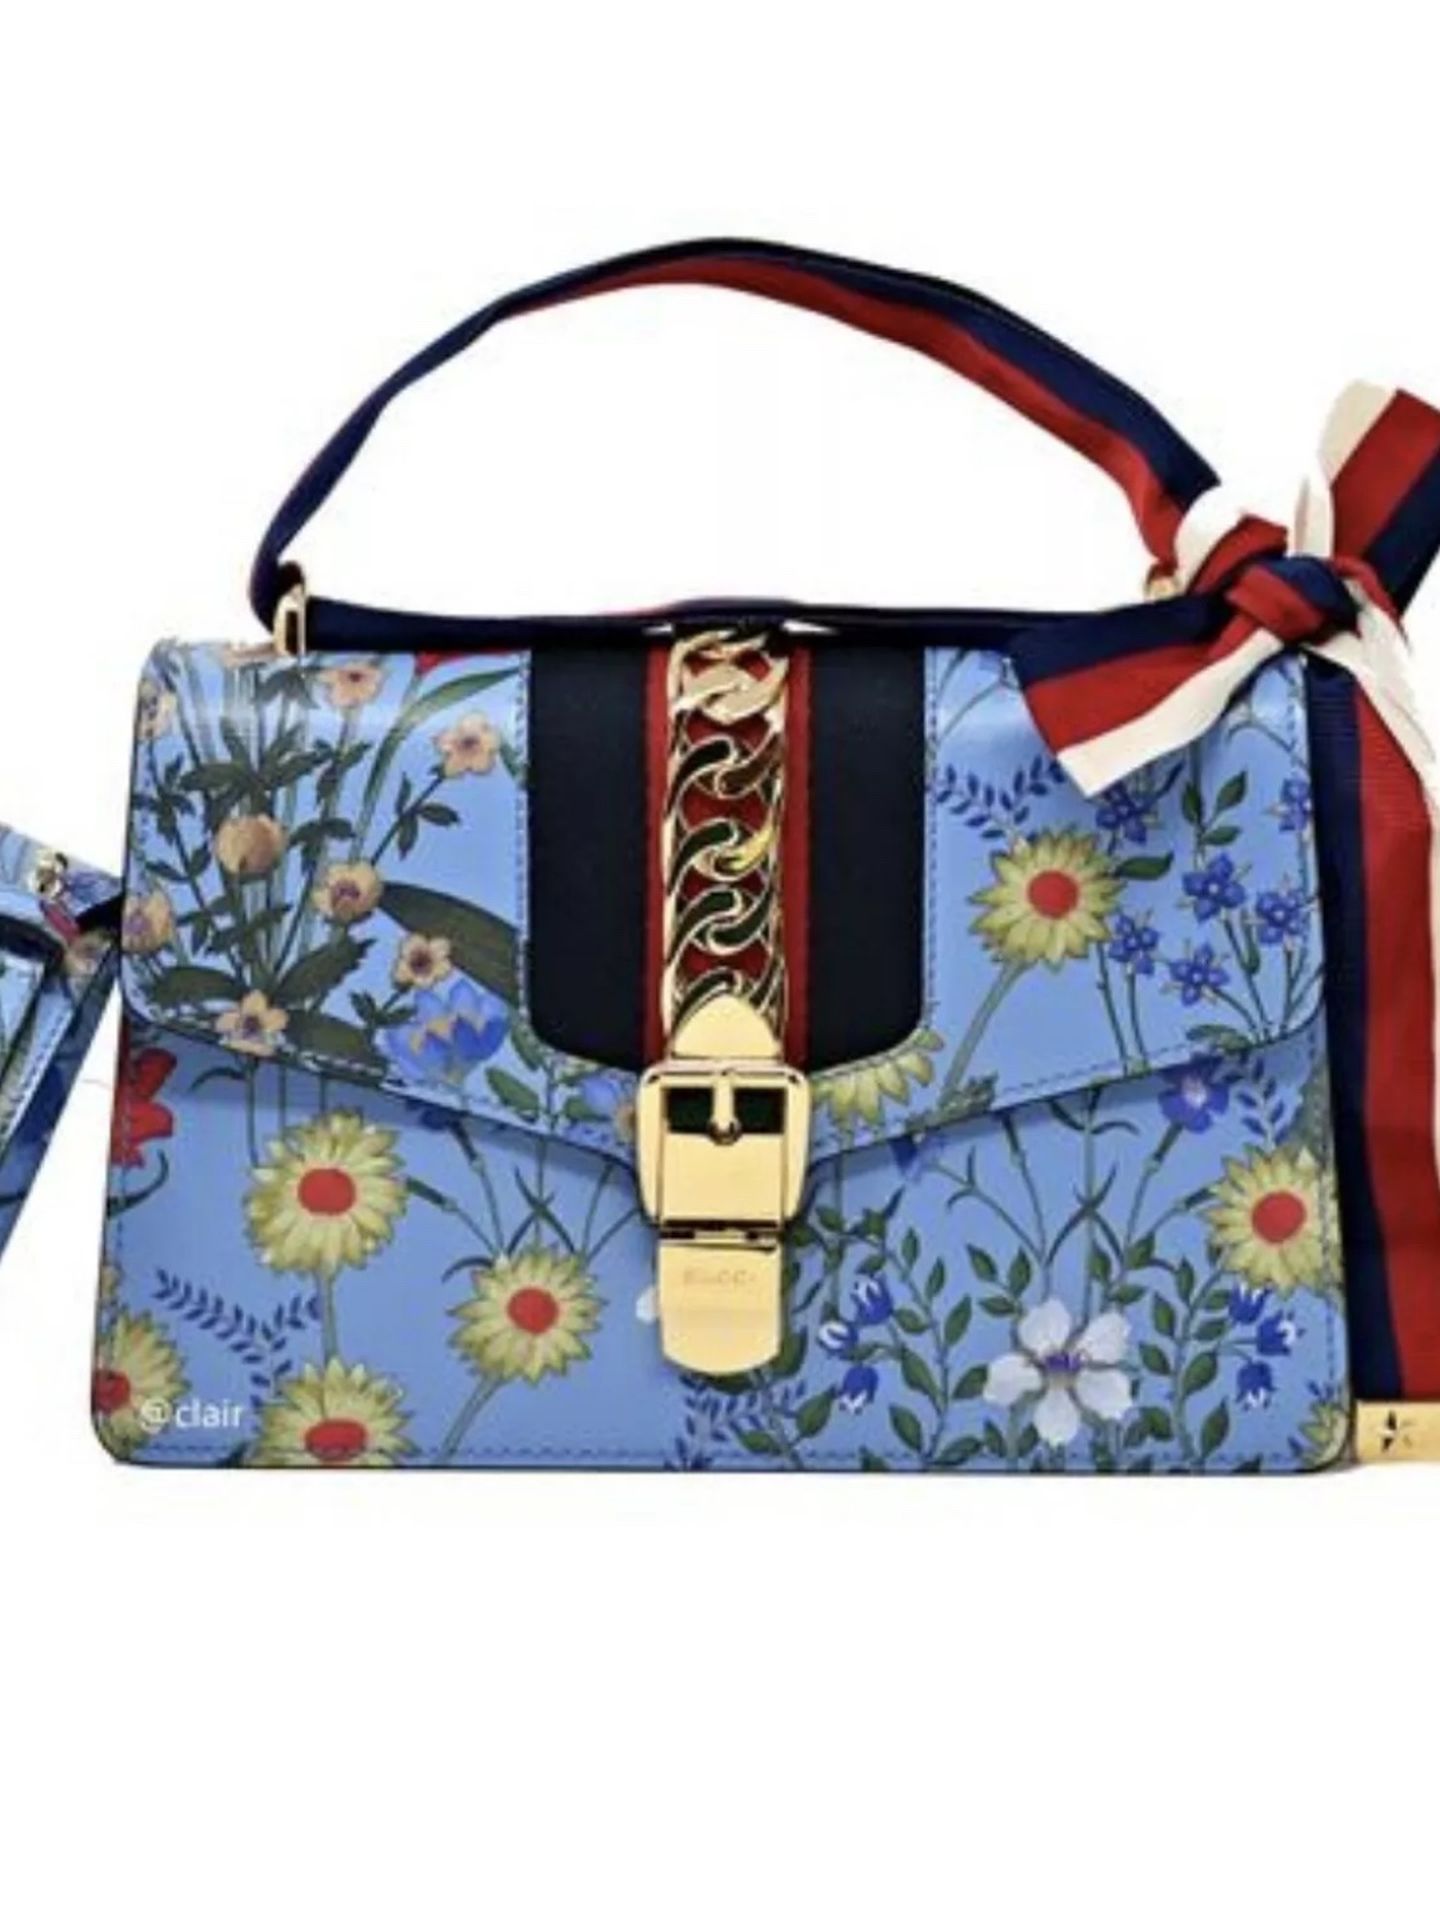 NWT Authentic Gucci Small Sylvie Flora Leather Shoulder Bag